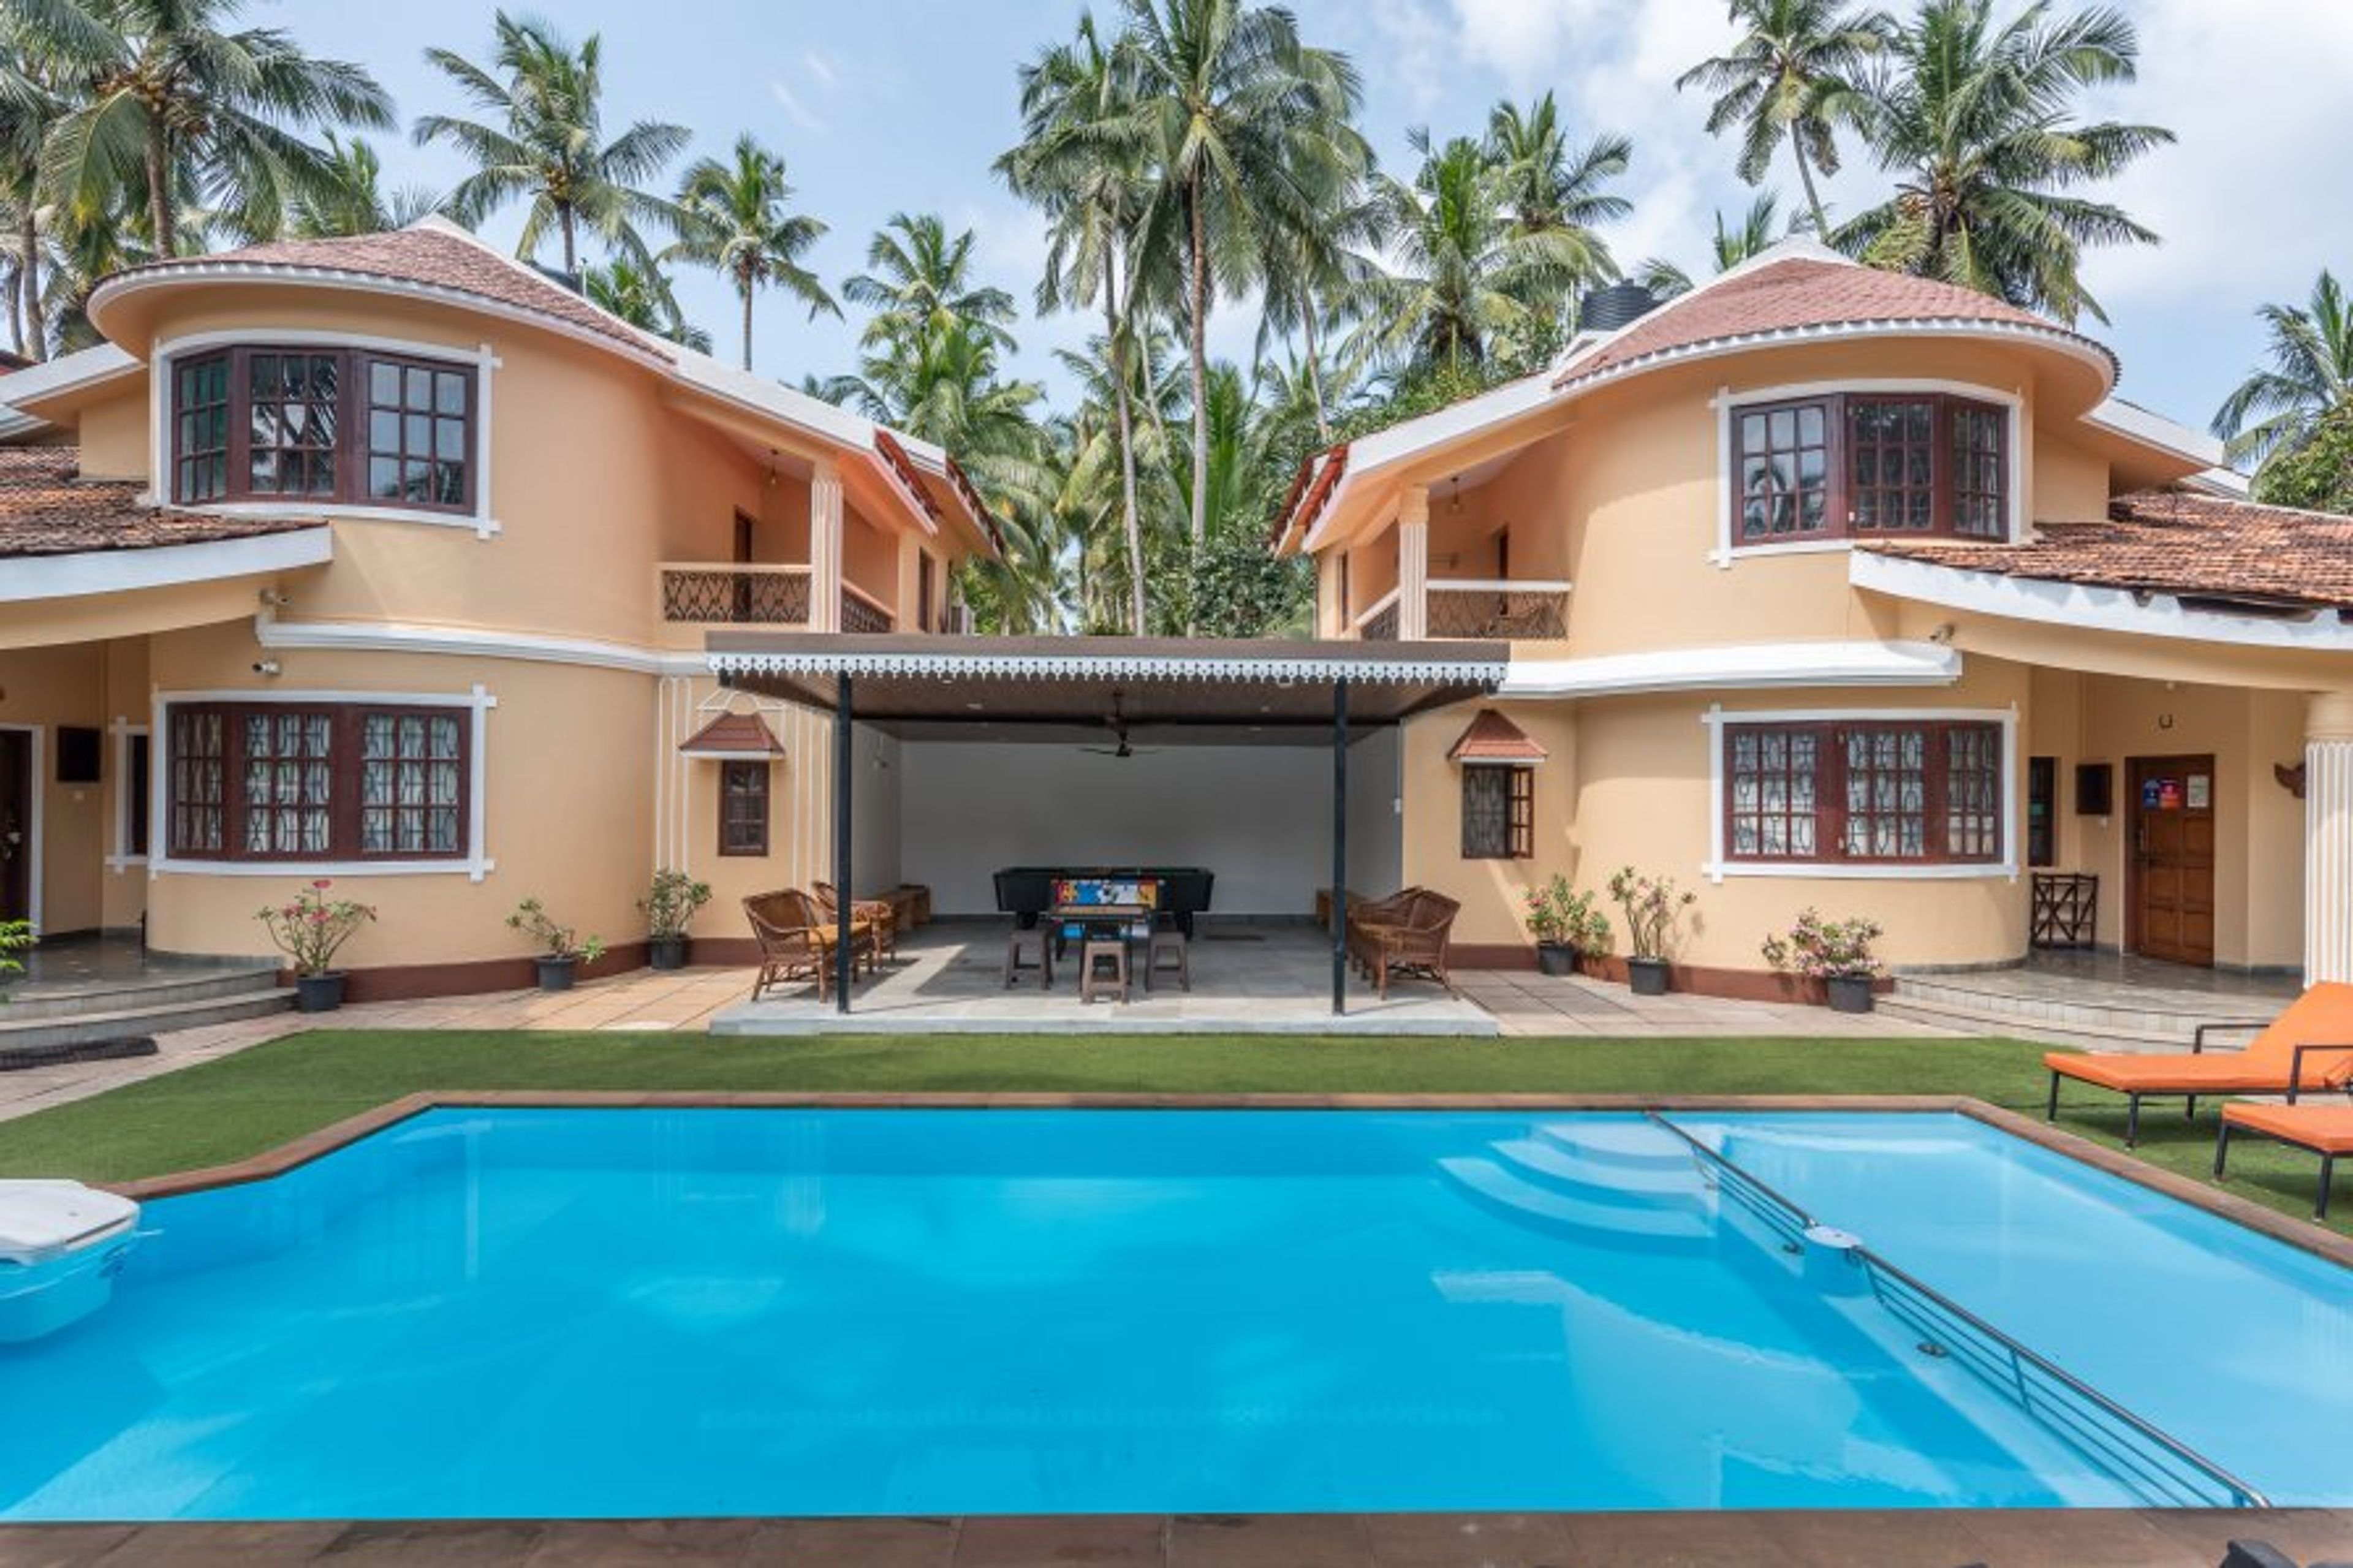 Villa Calangute Phase 3 with swimming pool, kids pool and pergola. 